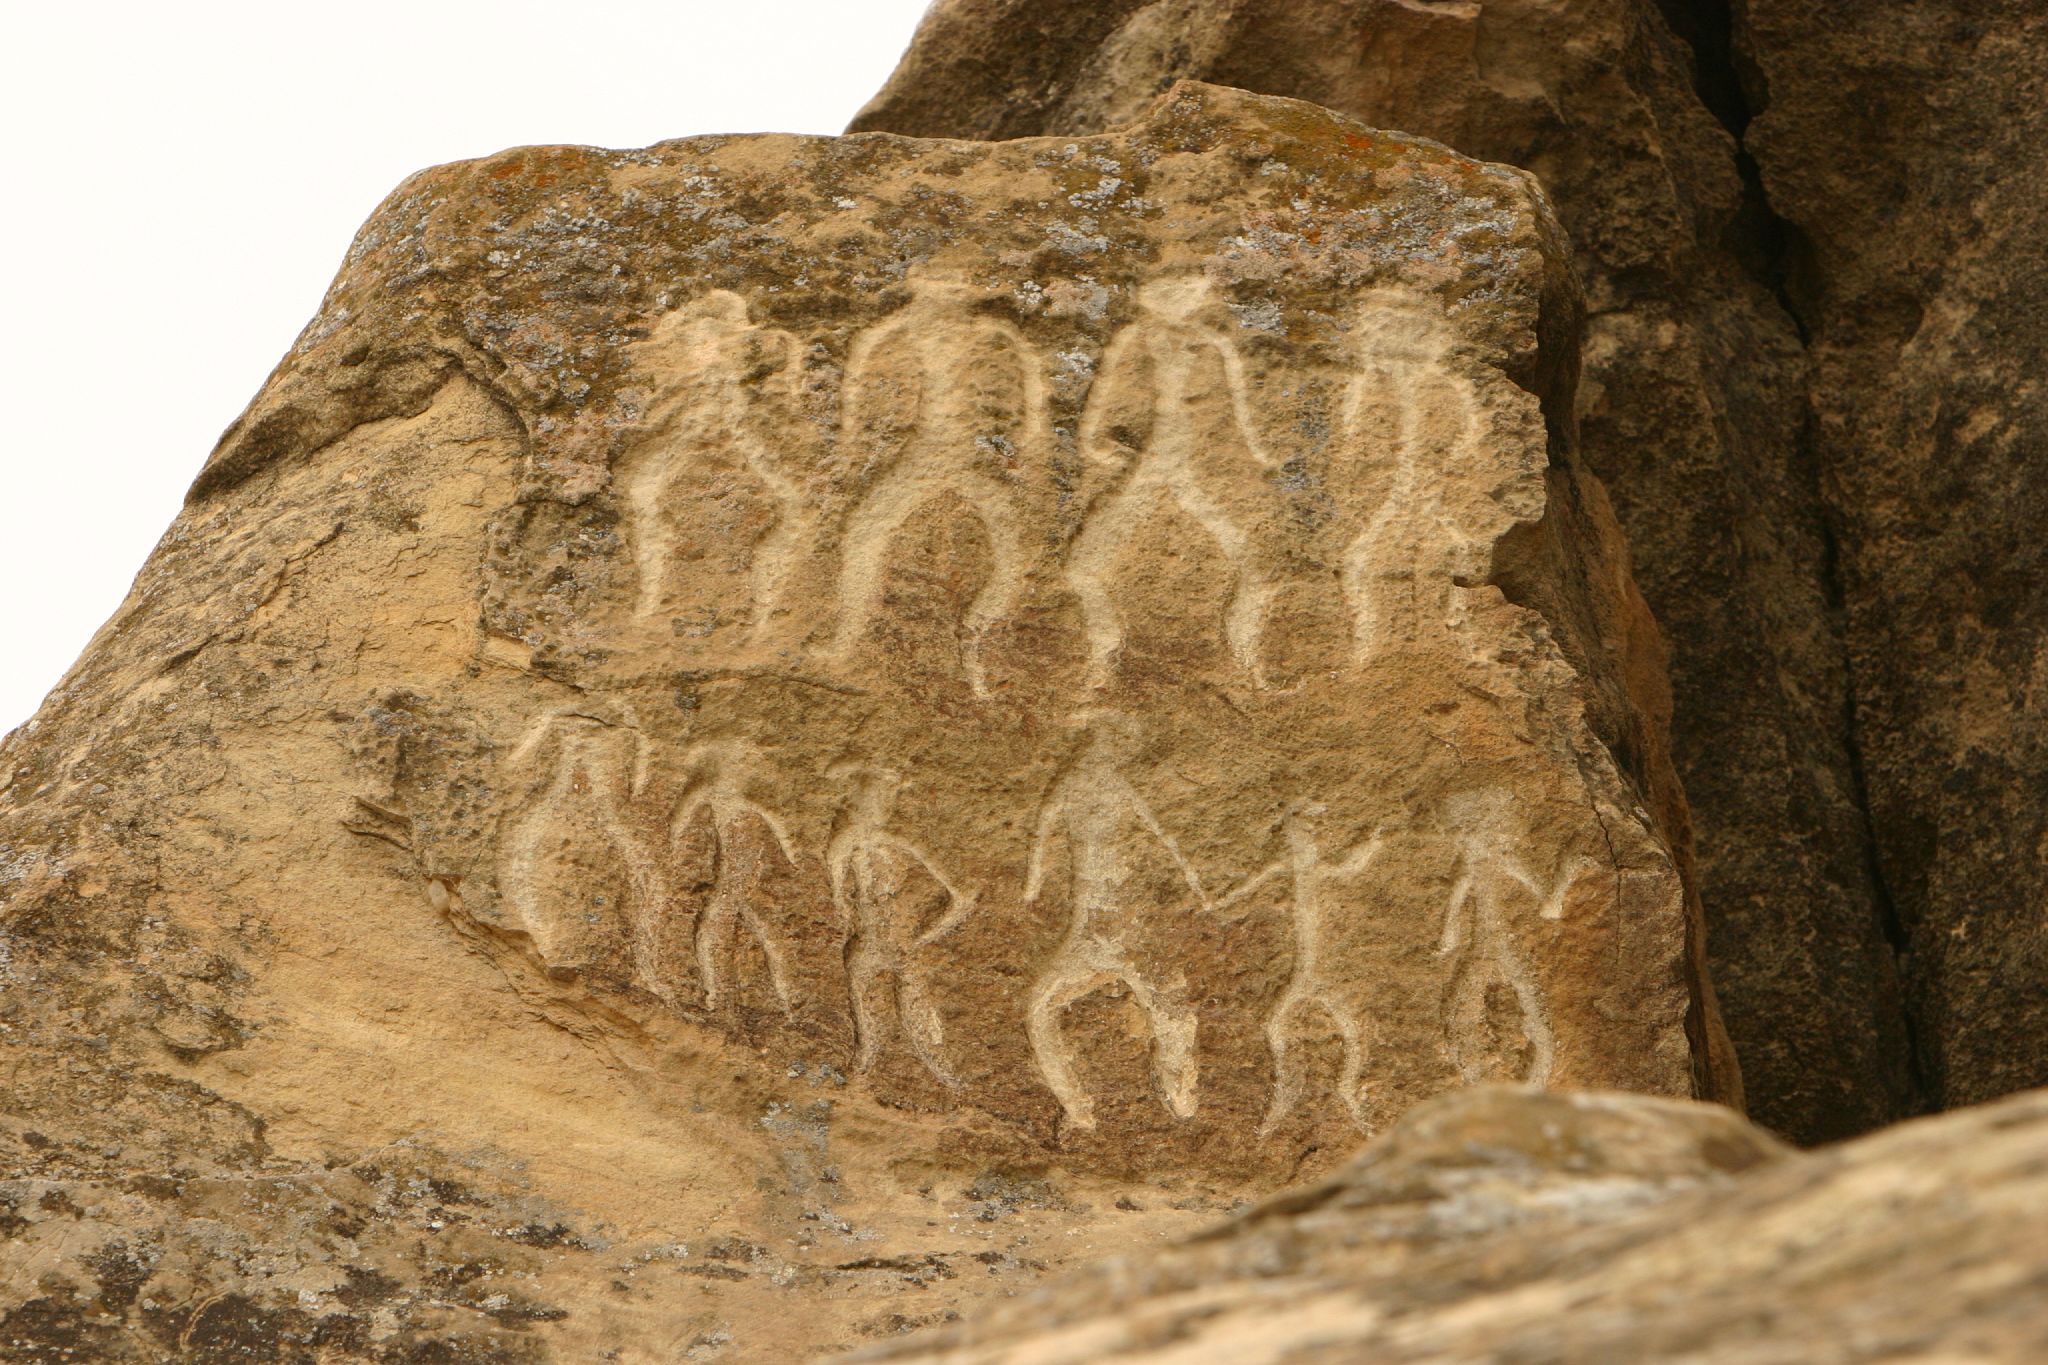 Over 18,000 tourists visit Gobustan since early 2017